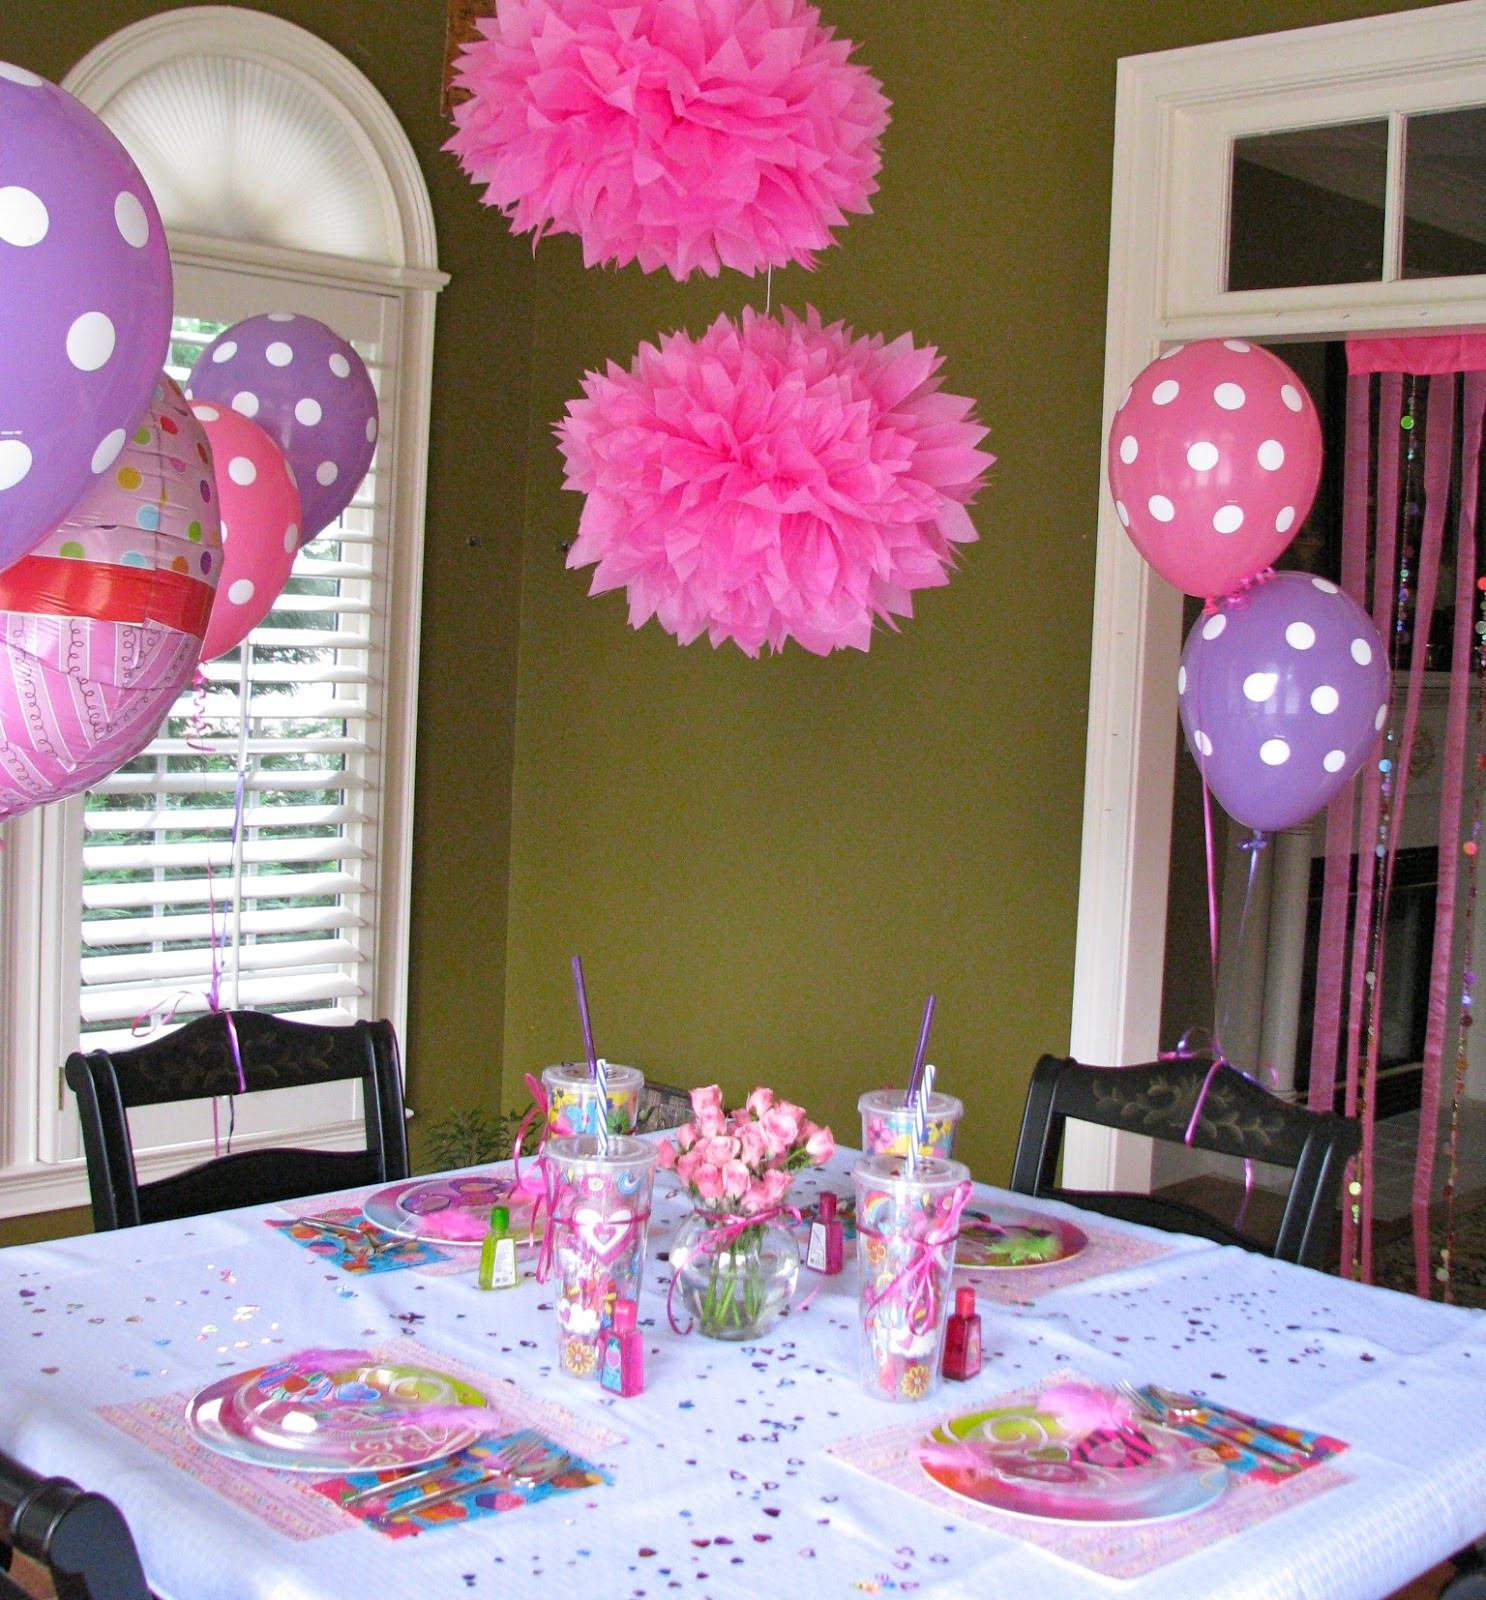 Girl Birthday Party Places
 HomeMadeville Your Place for HomeMade Inspiration Girl s